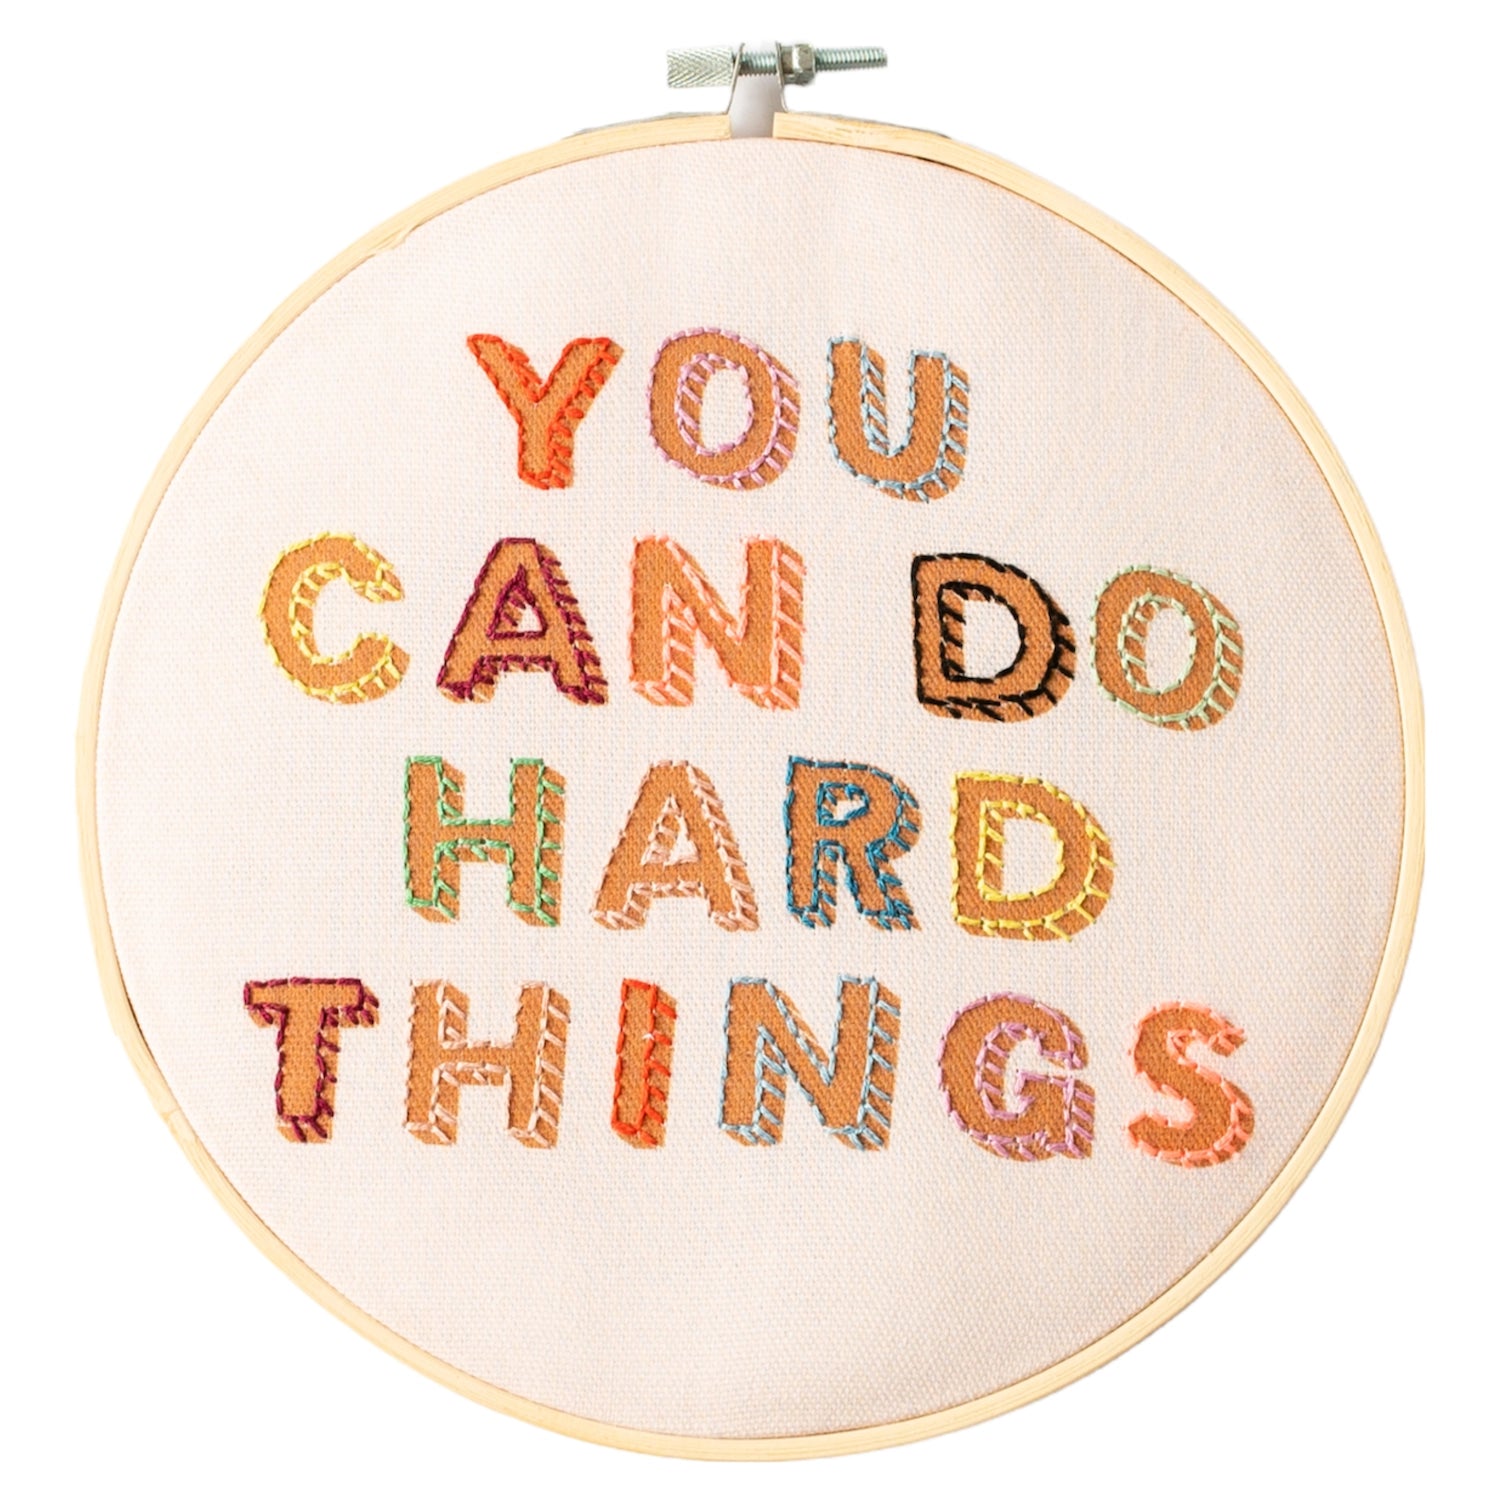 "You Can Do Hard Things" Embroidery Hoop Kit